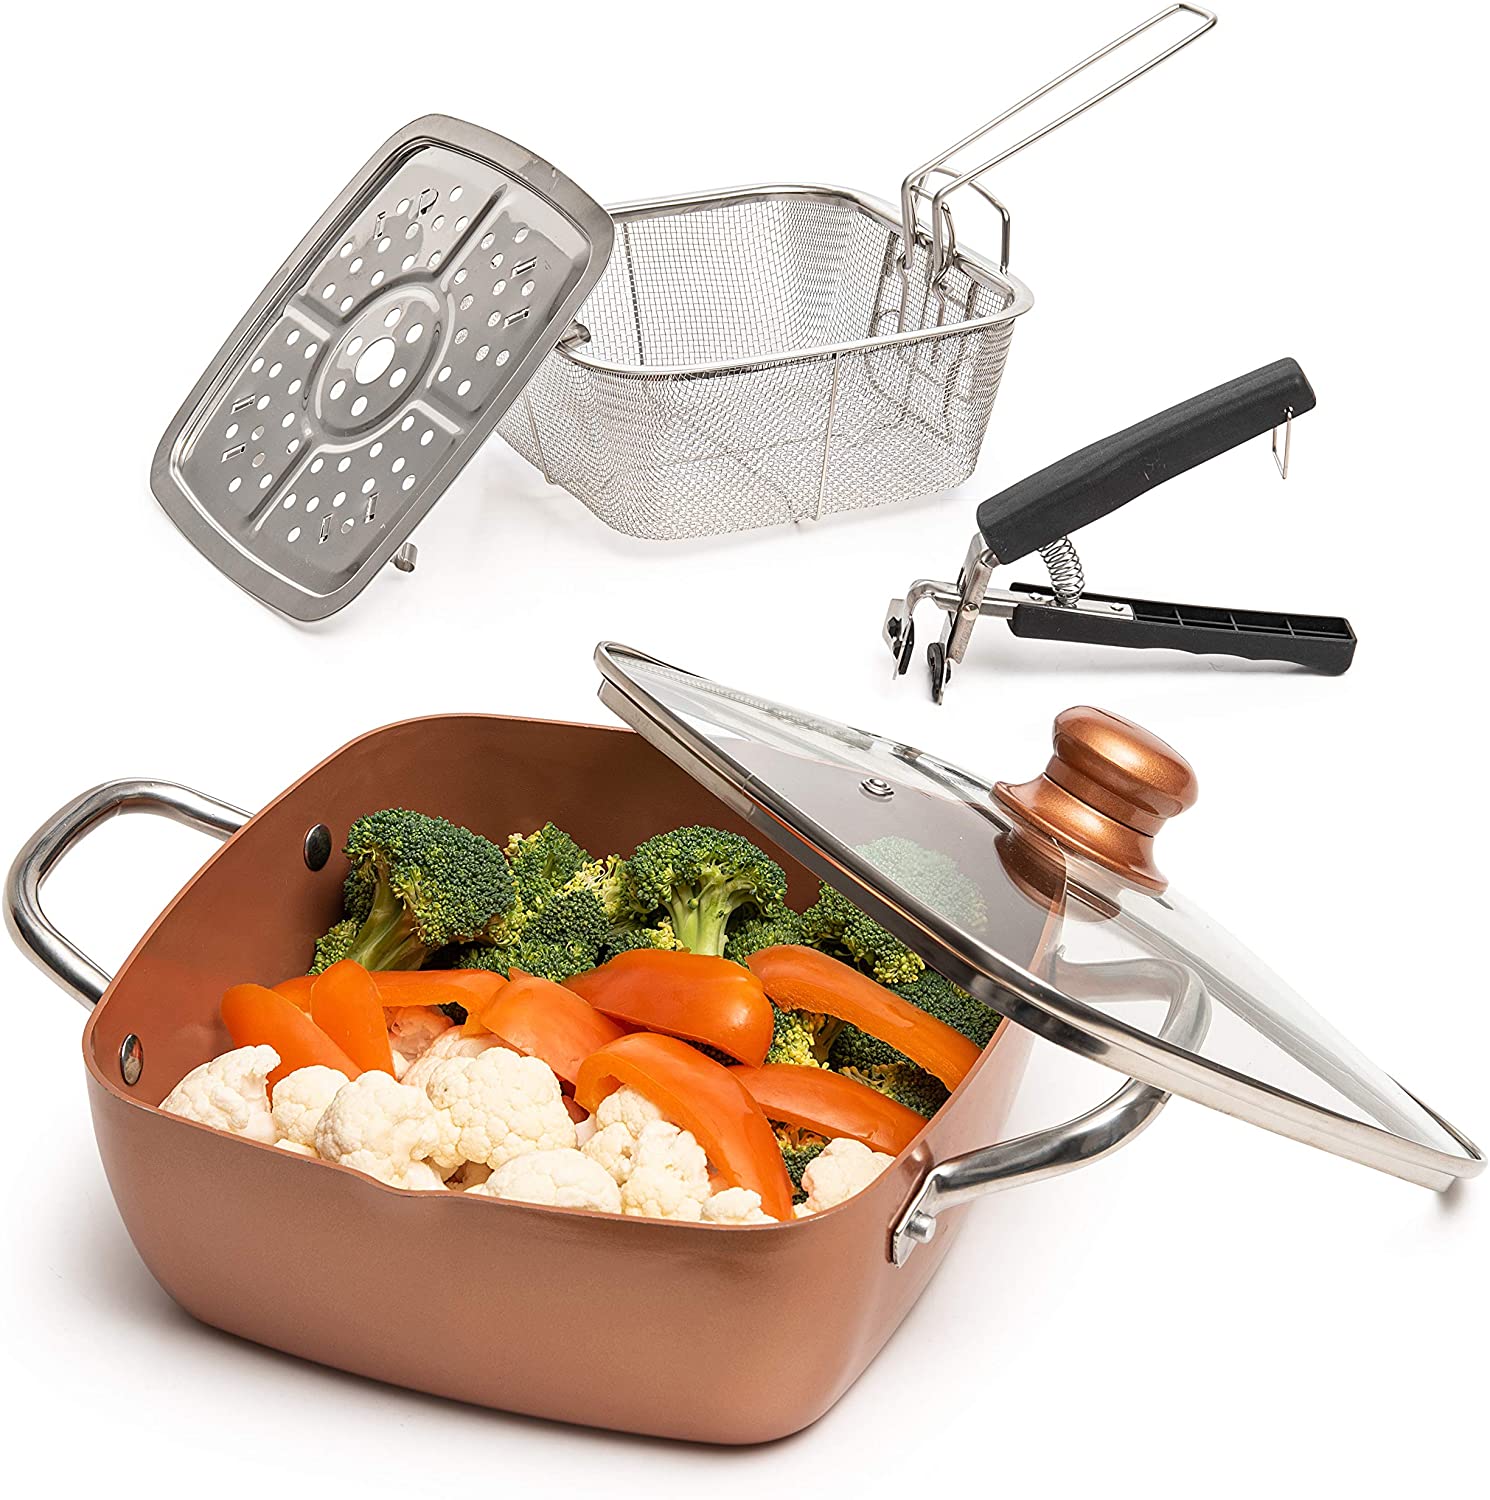 Moss & Stone Easy Clean Copper Pan, 9.5-Inch